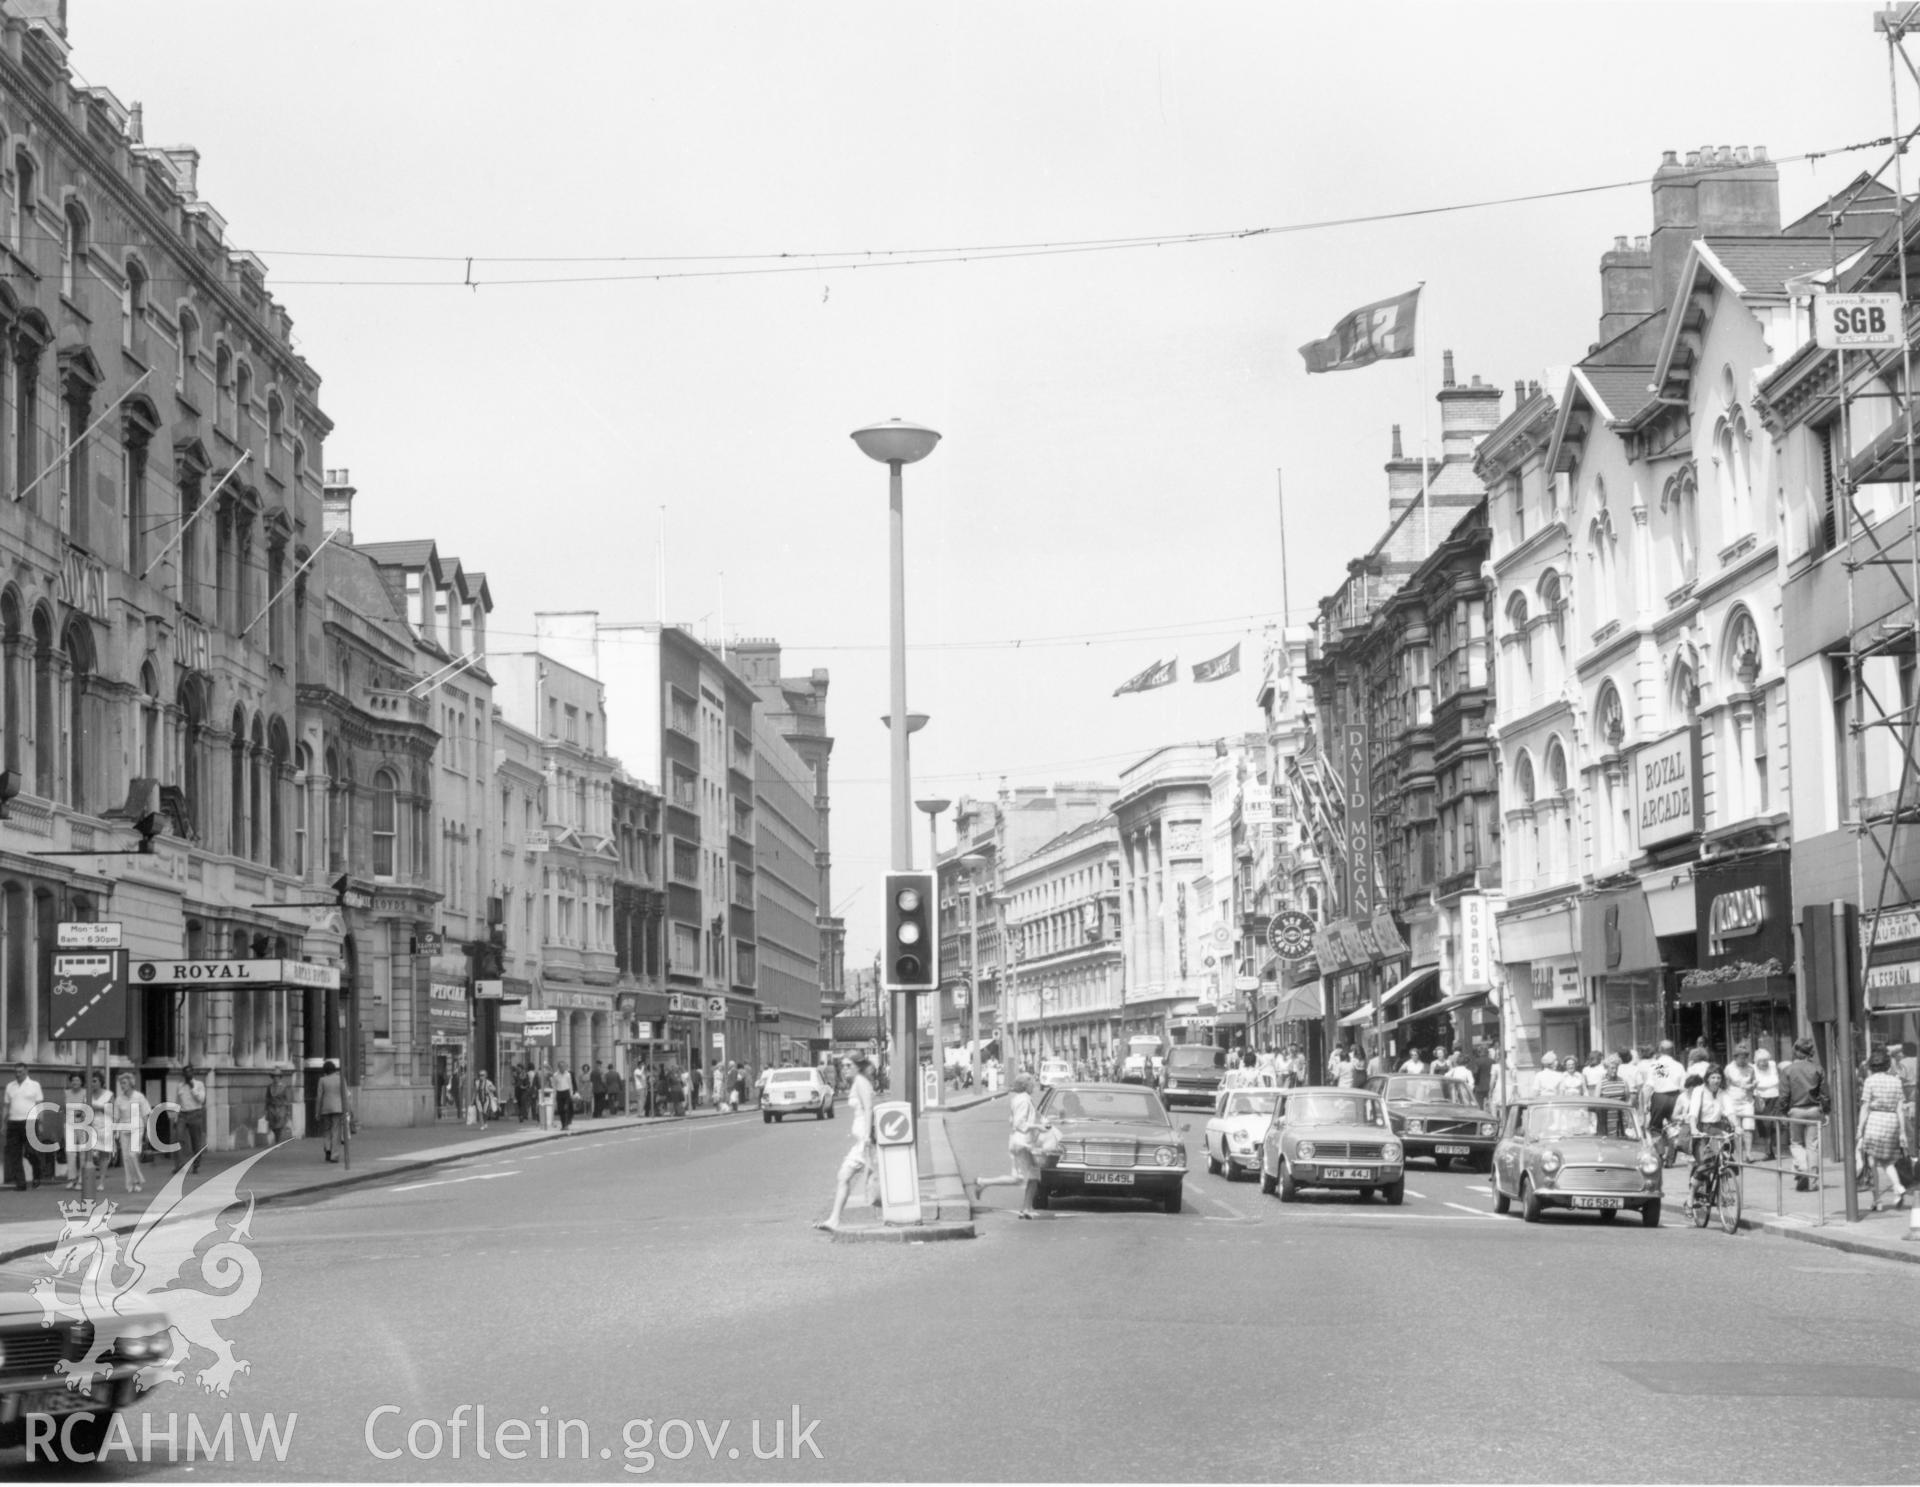 1 b/w print showing St Mary Street, Cardiff, collated by the former Central Office of Information.